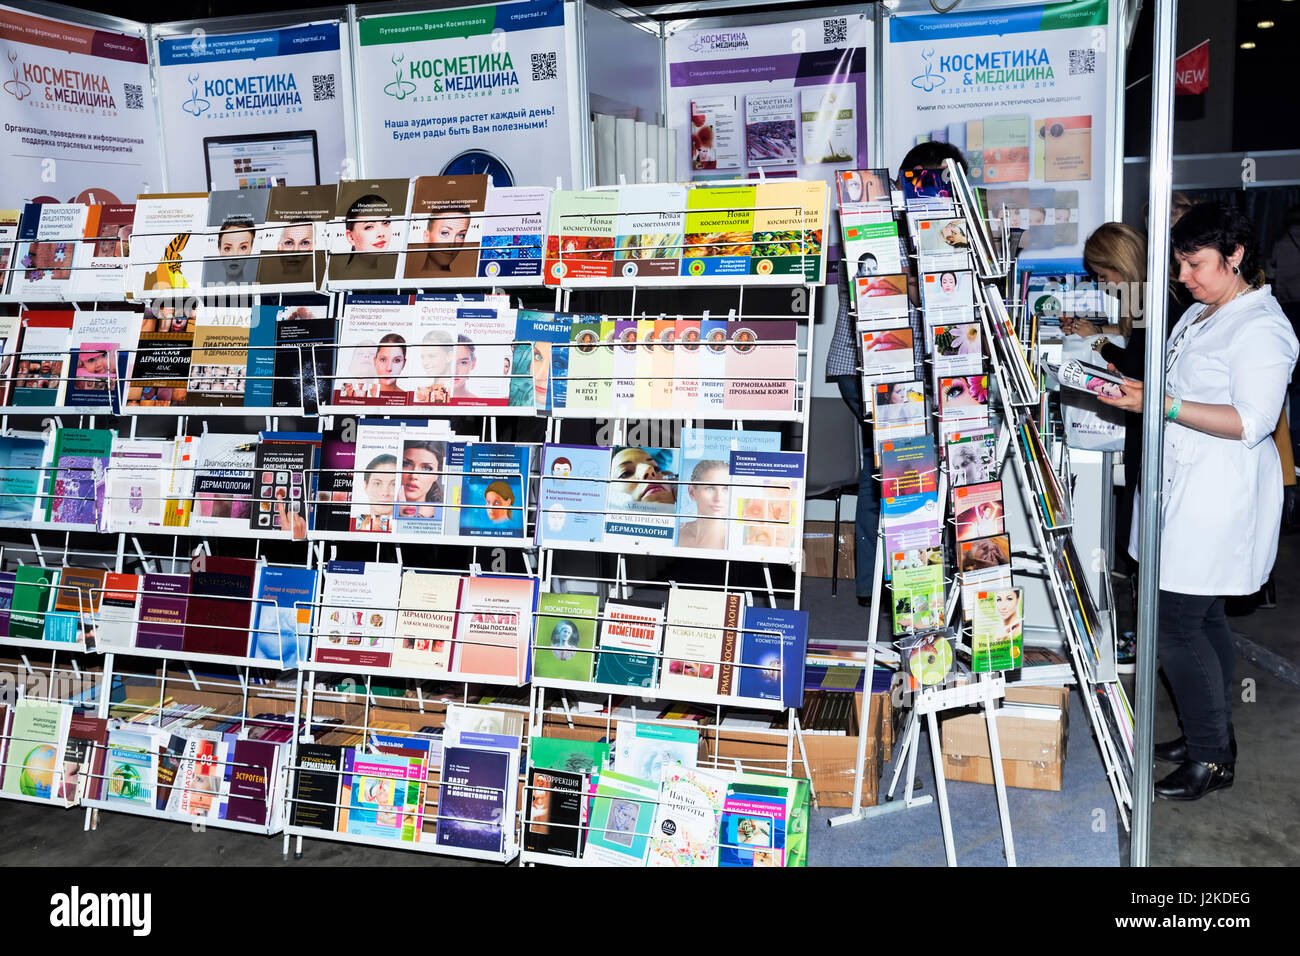 Moscow, Russian Federation - April 20, 2017: Intercharm XVI International exhibition of professional cosmetics and equipment for beauty salons Stock Photo